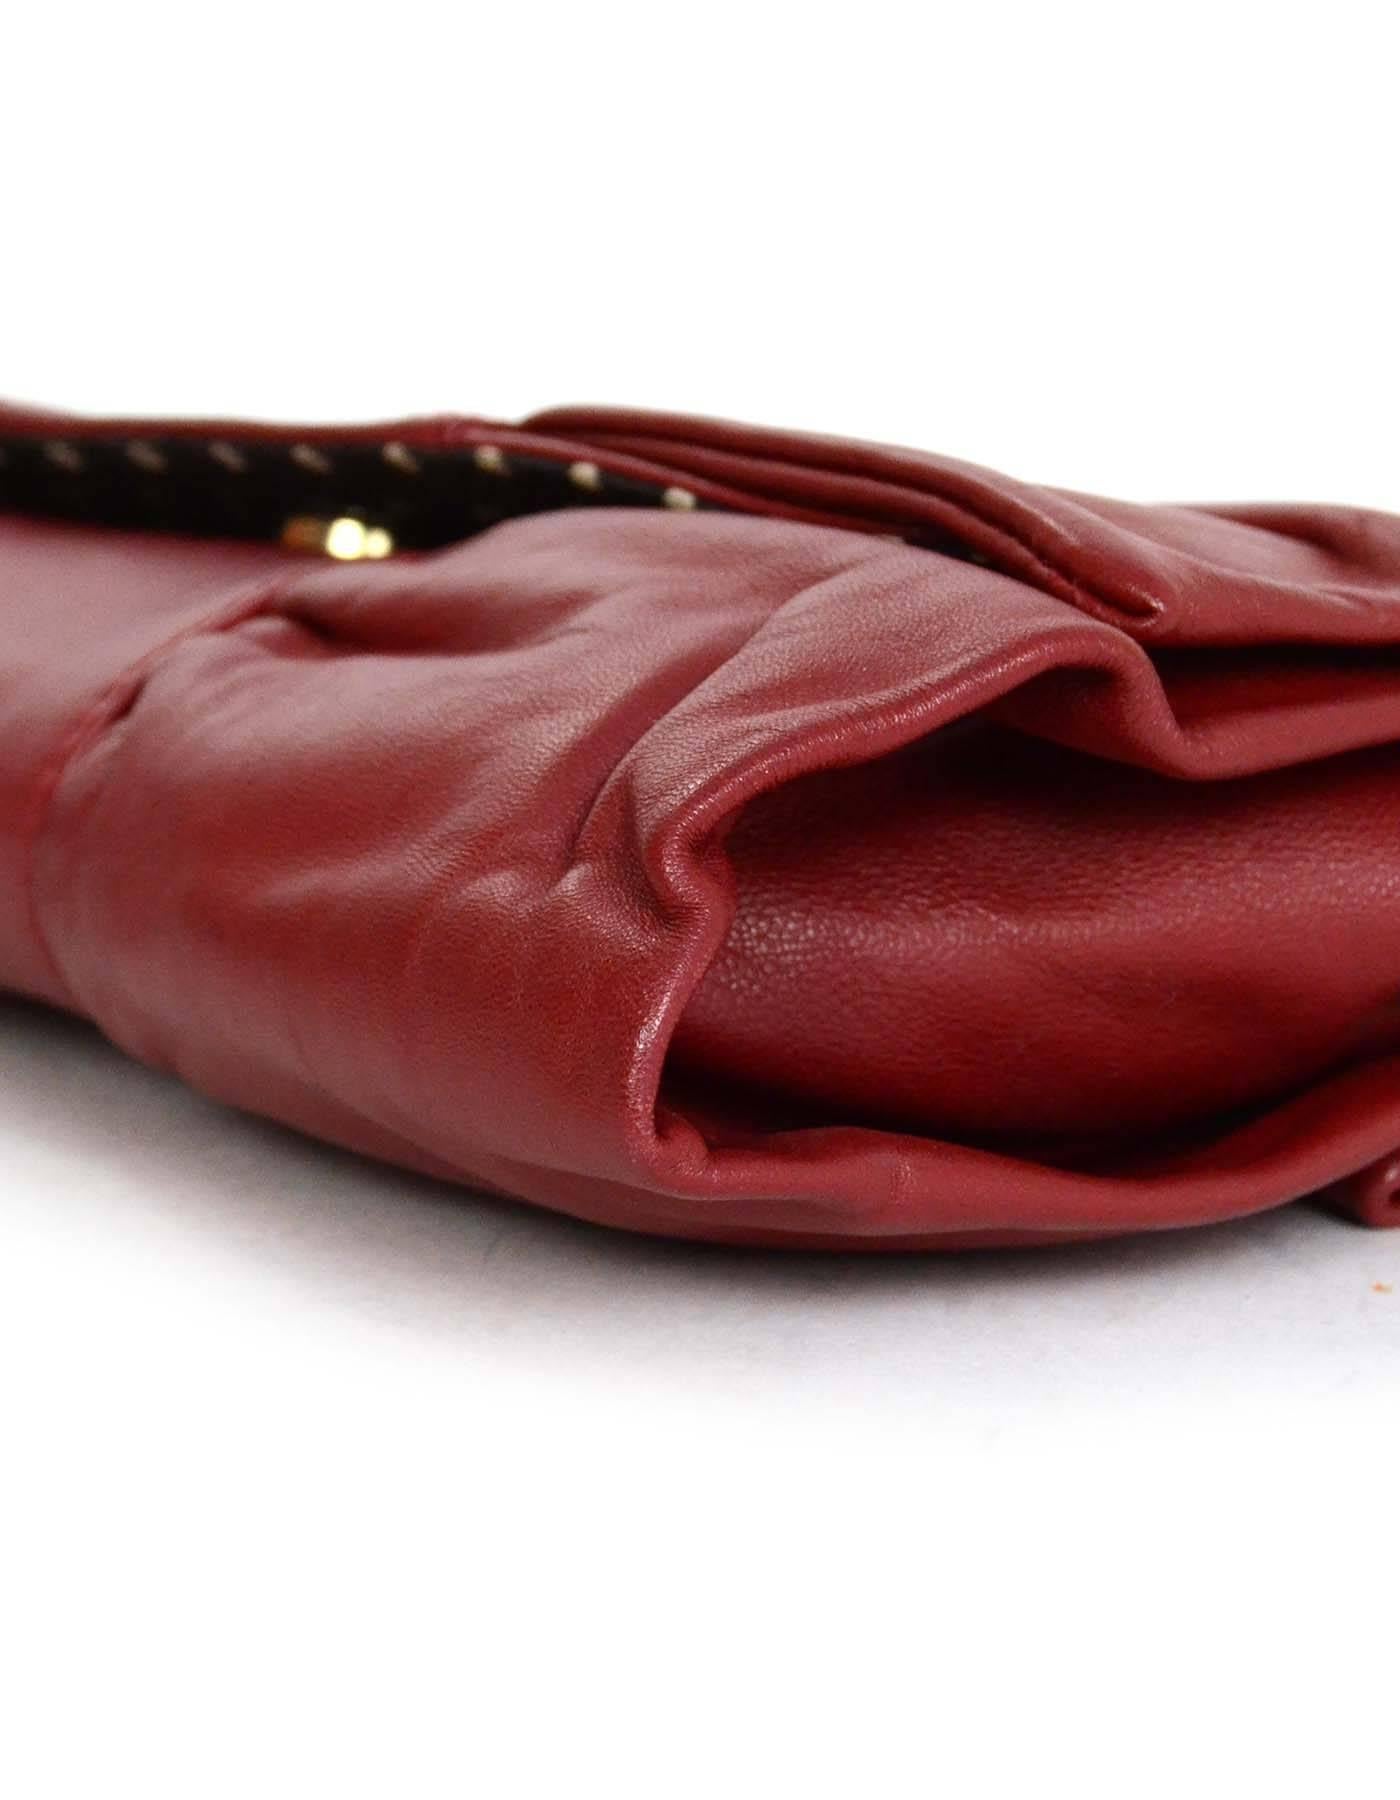 Furla Burgundy Leather Bow Clutch In Excellent Condition In New York, NY